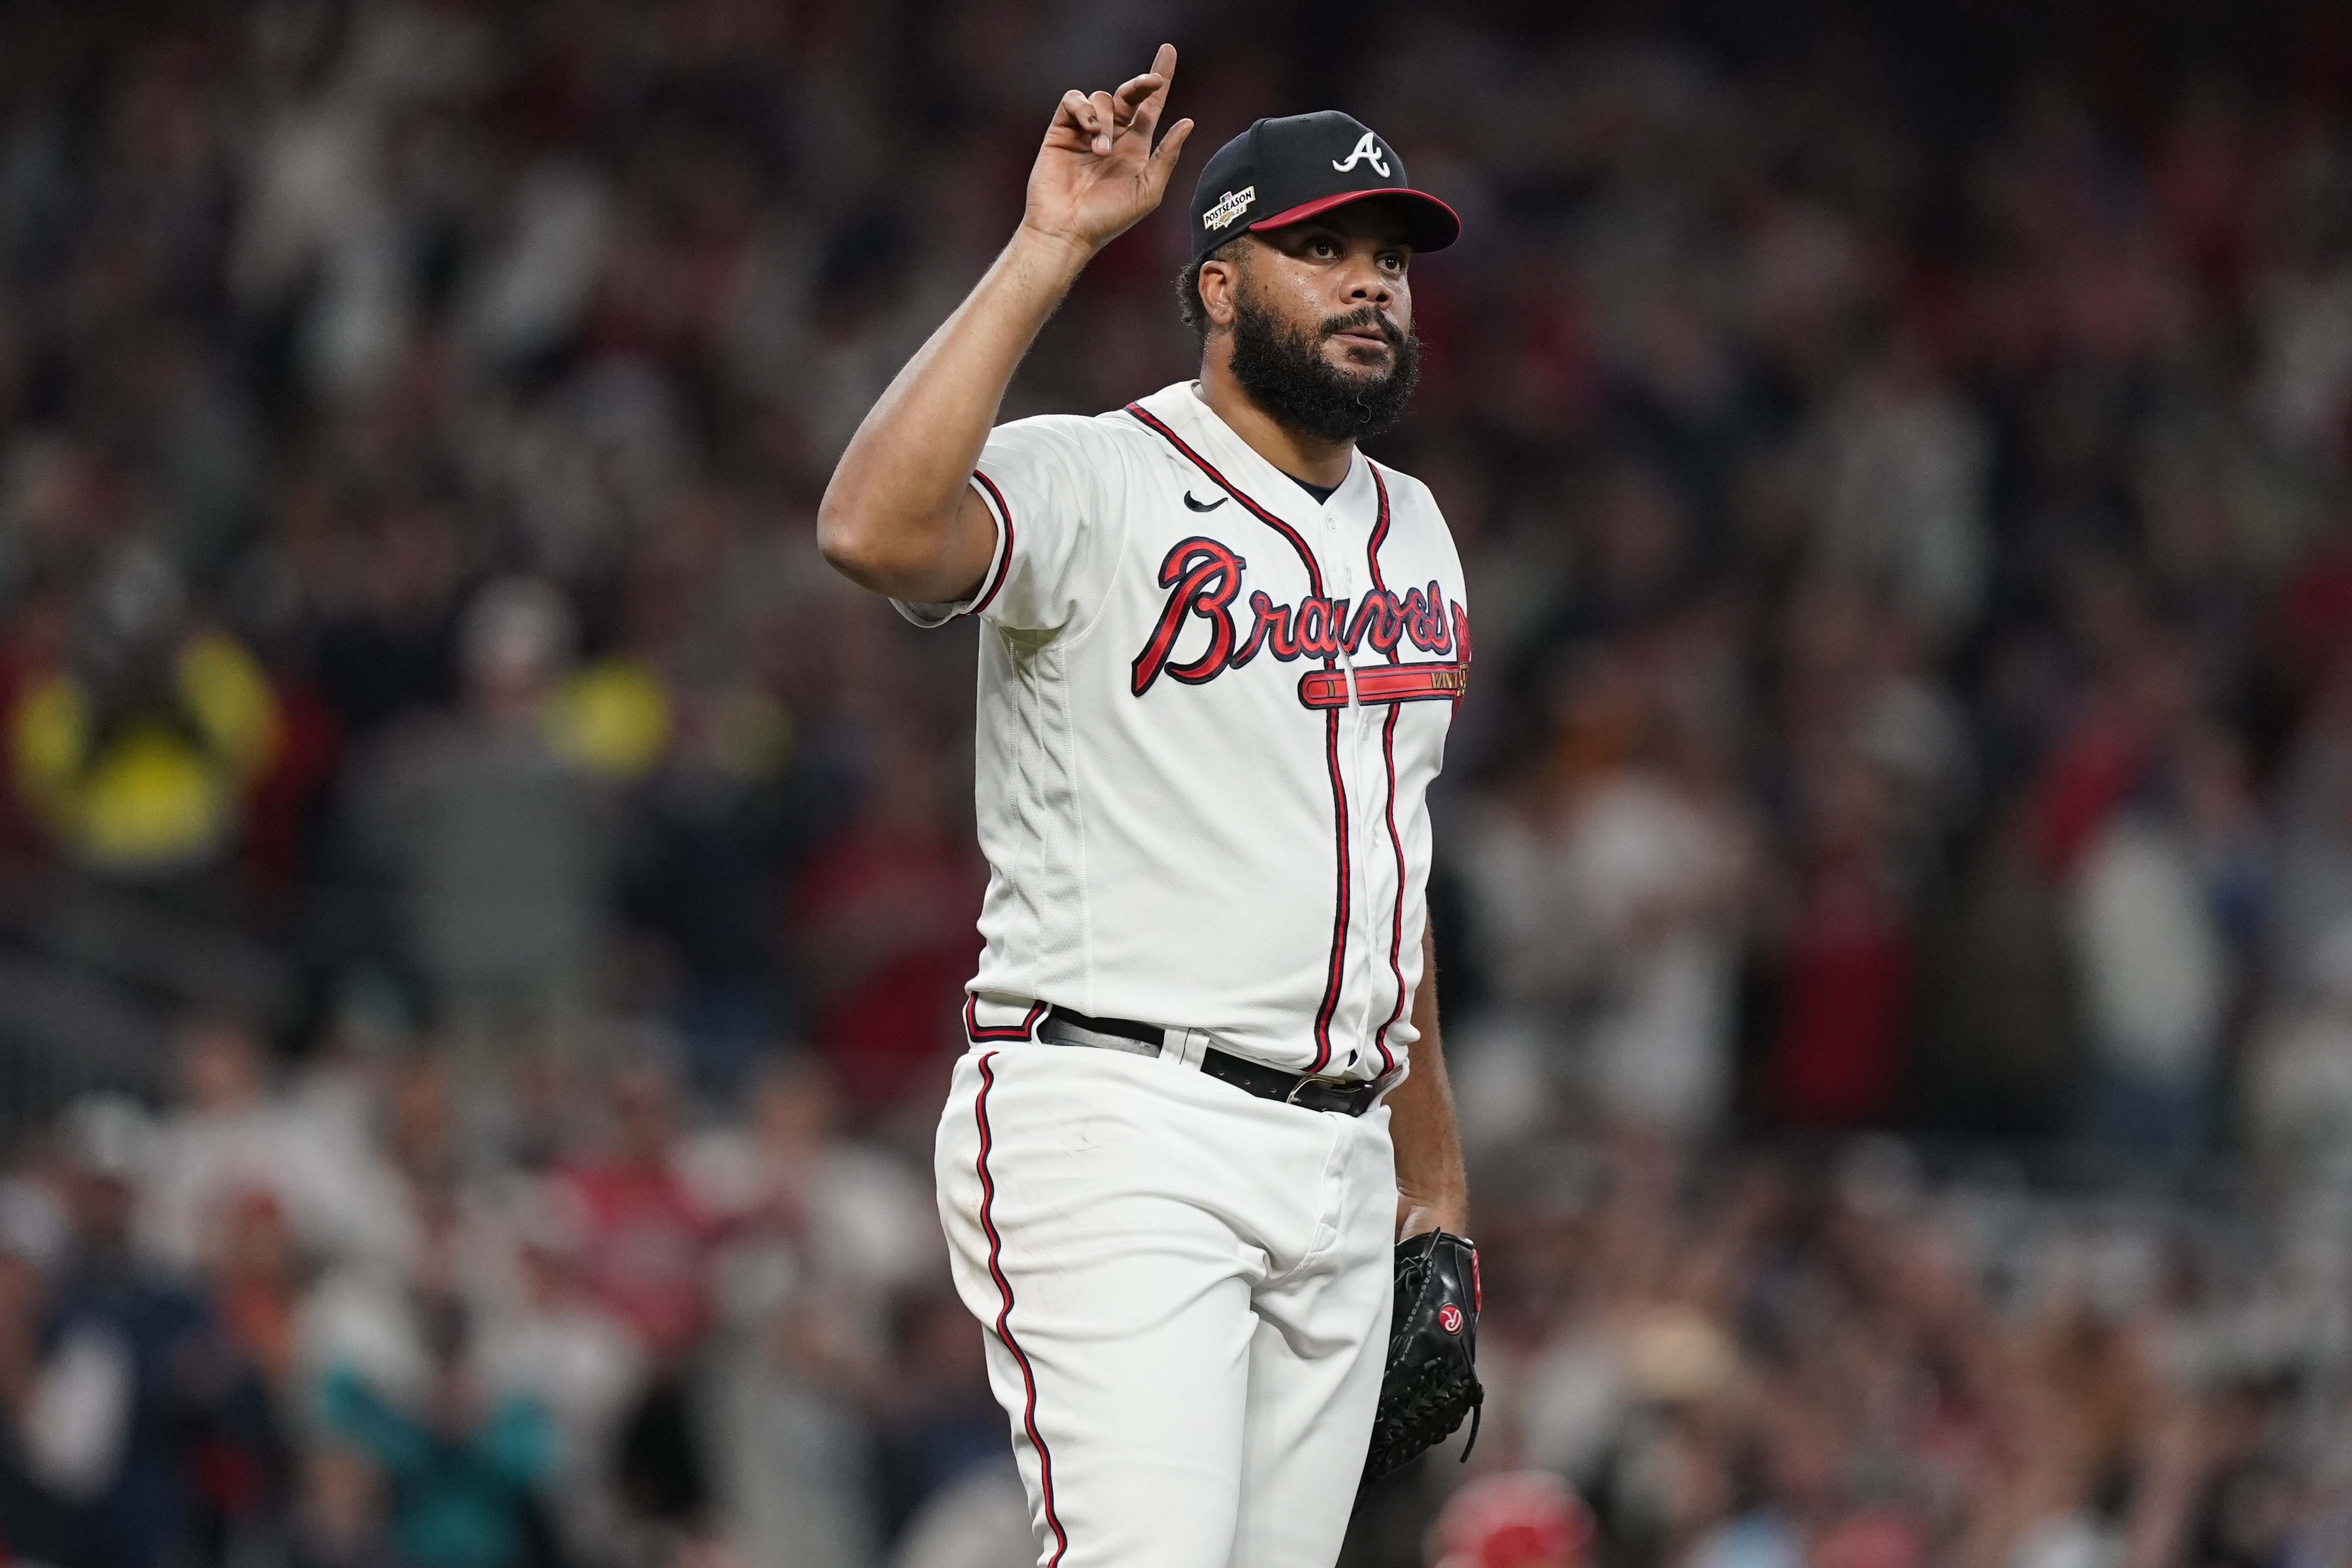 Red Sox closer Kenley Jansen arrives in Boston to cold reception